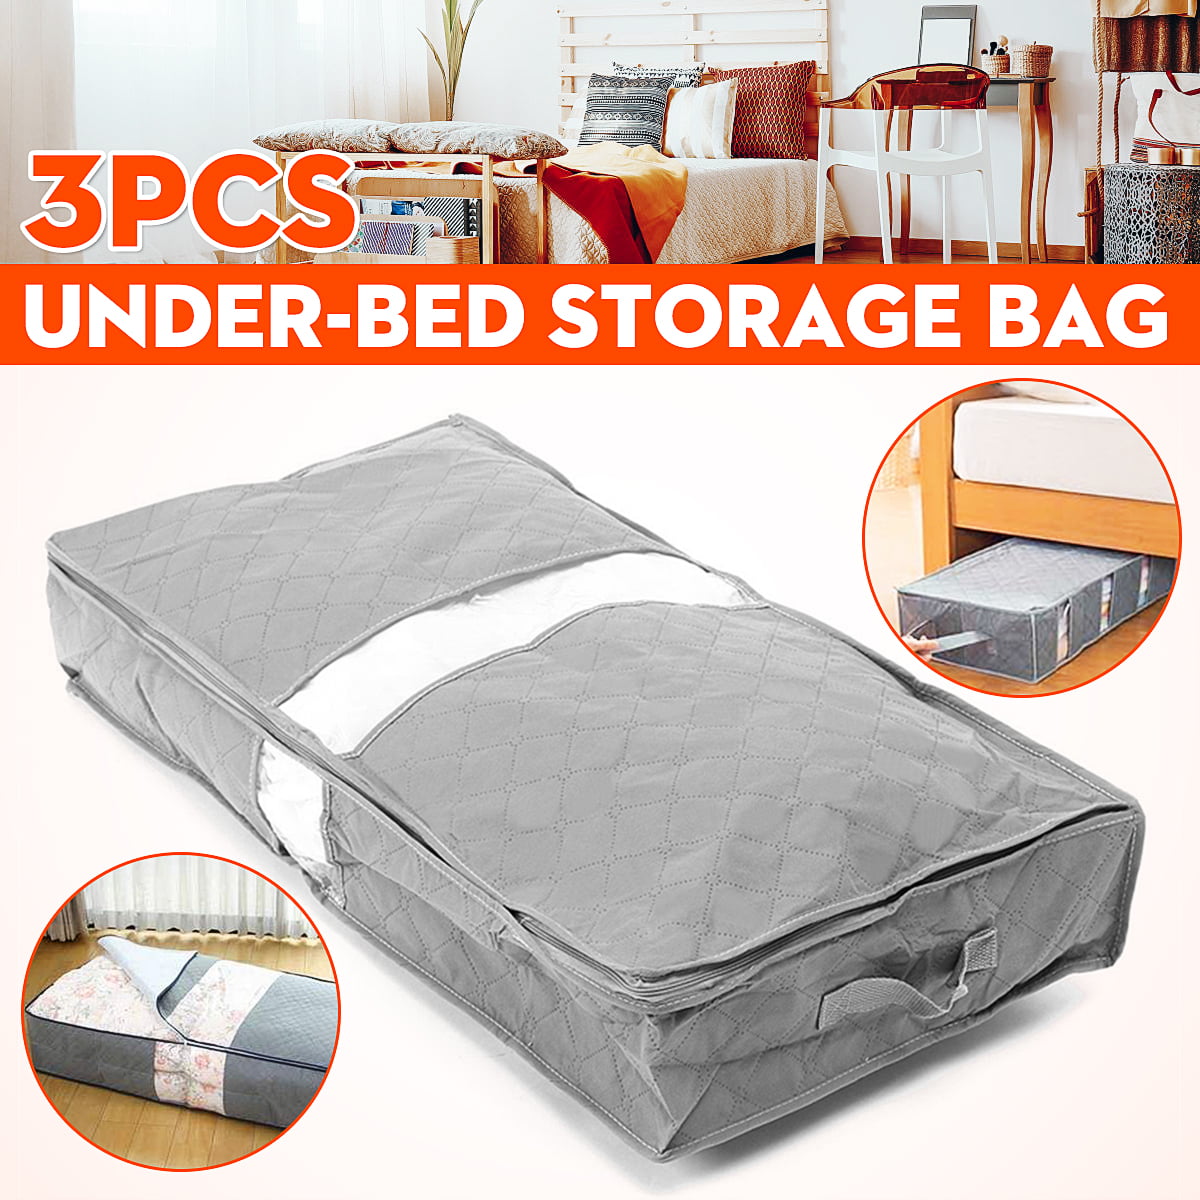 Portable Foldable Gray Under Bed Storage Bag Container Clothes Shoes Blanket Hot 